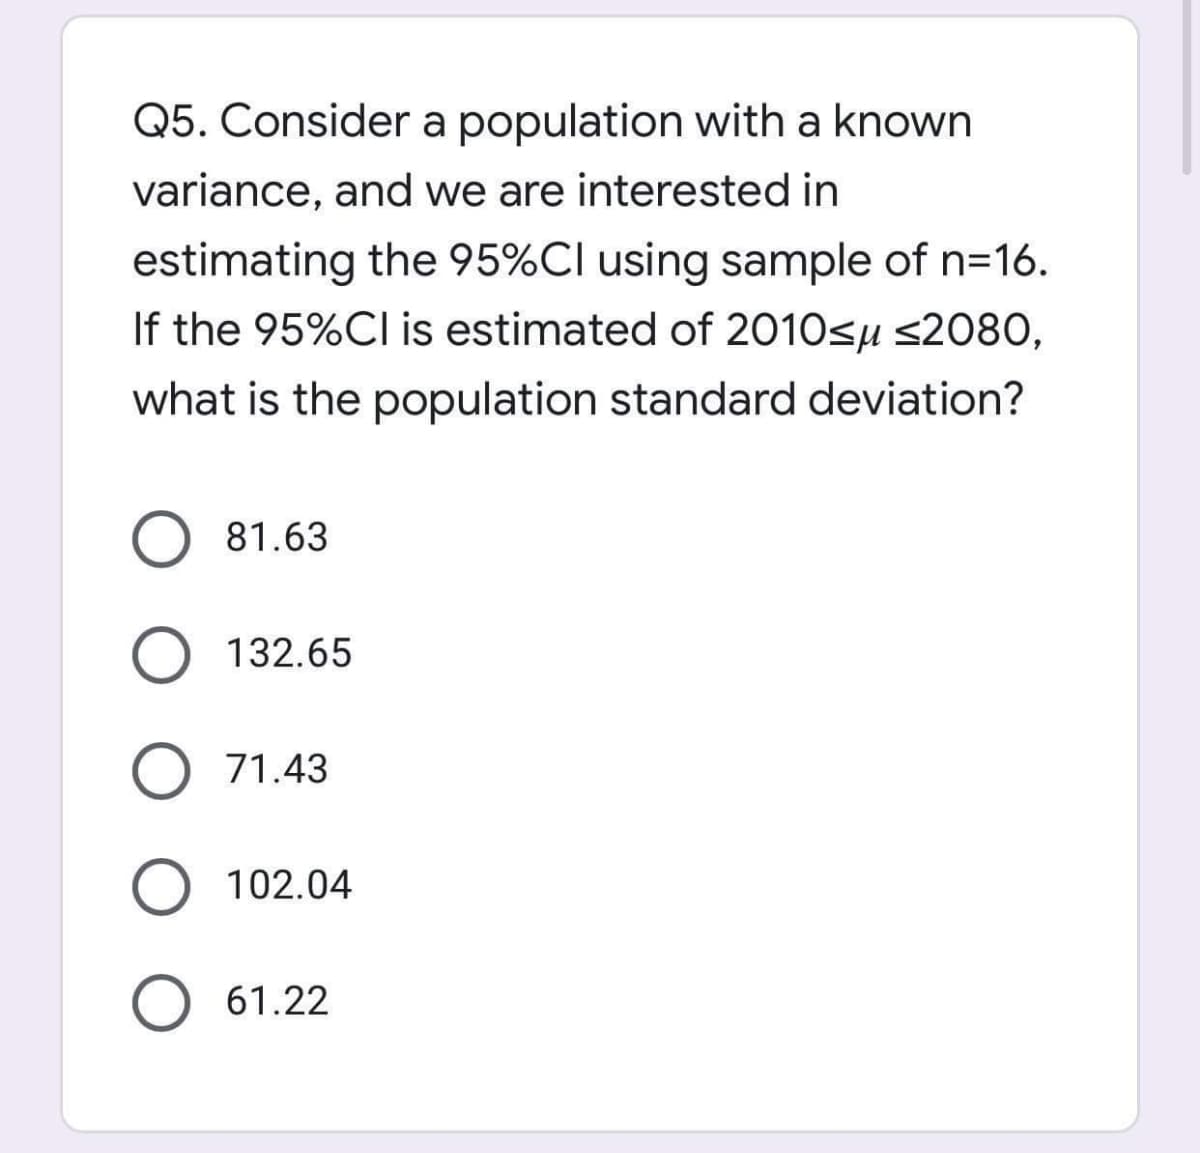 Q5. Consider a population with a known
variance, and we are interested in
estimating the 95%Cl using sample of n=16.
If the 95%Cl is estimated of 2010sµ s2080,
what is the population standard deviation?
81.63
132.65
71.43
O 102.04
61.22
